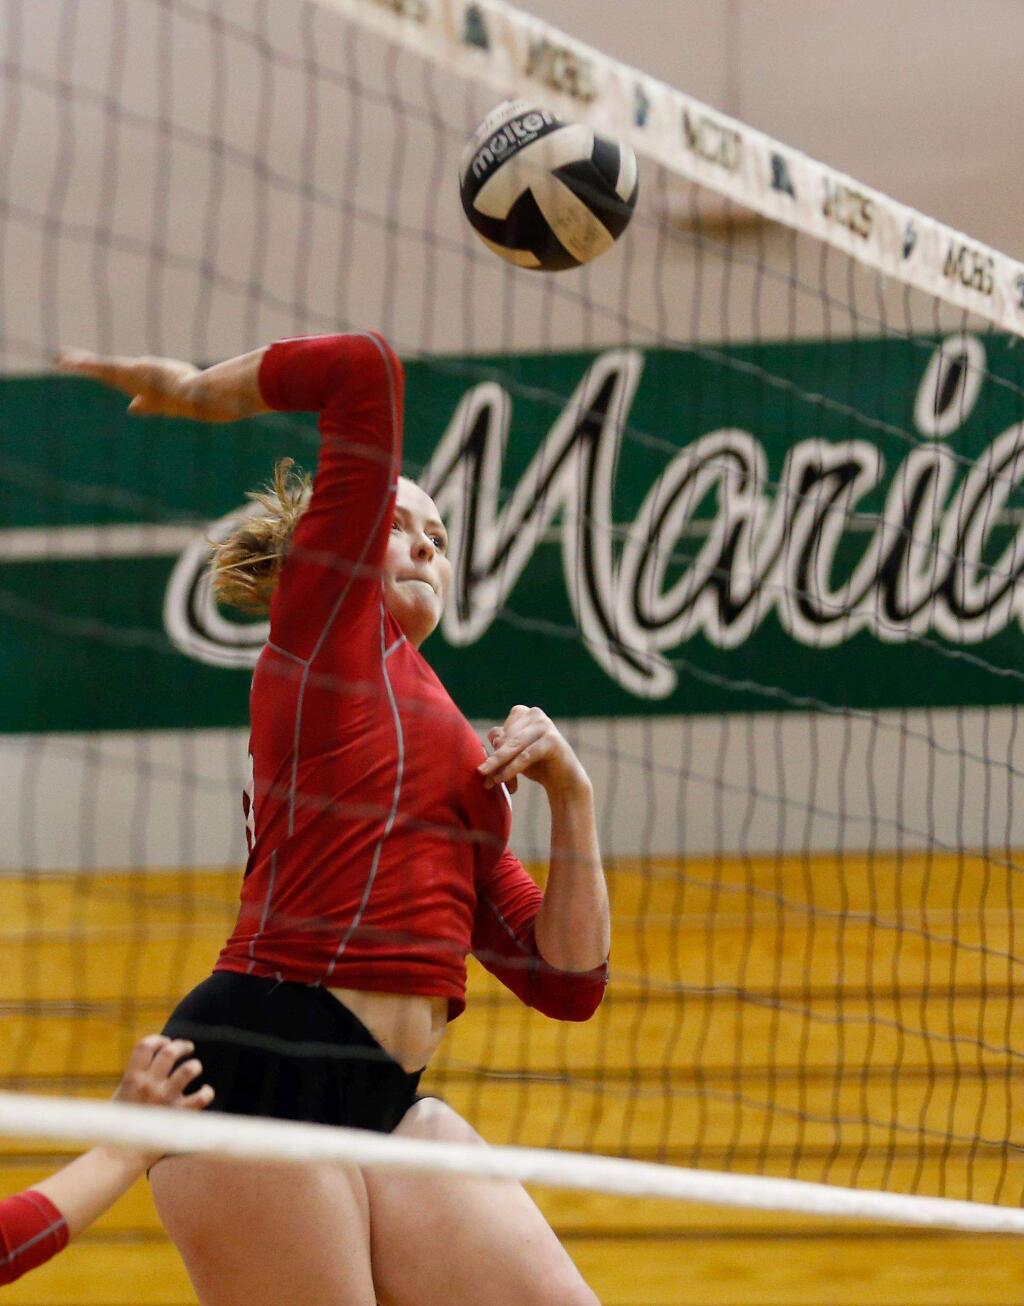 Montgomery's Kailey MacKinnon (13) goes up to spike the ball during a varsity volleyball match between Montgomery and Maria Carrillo high schools in Santa Rosa, California on Tuesday, October 3, 2017. (Alvin Jornada / The Press Democrat)